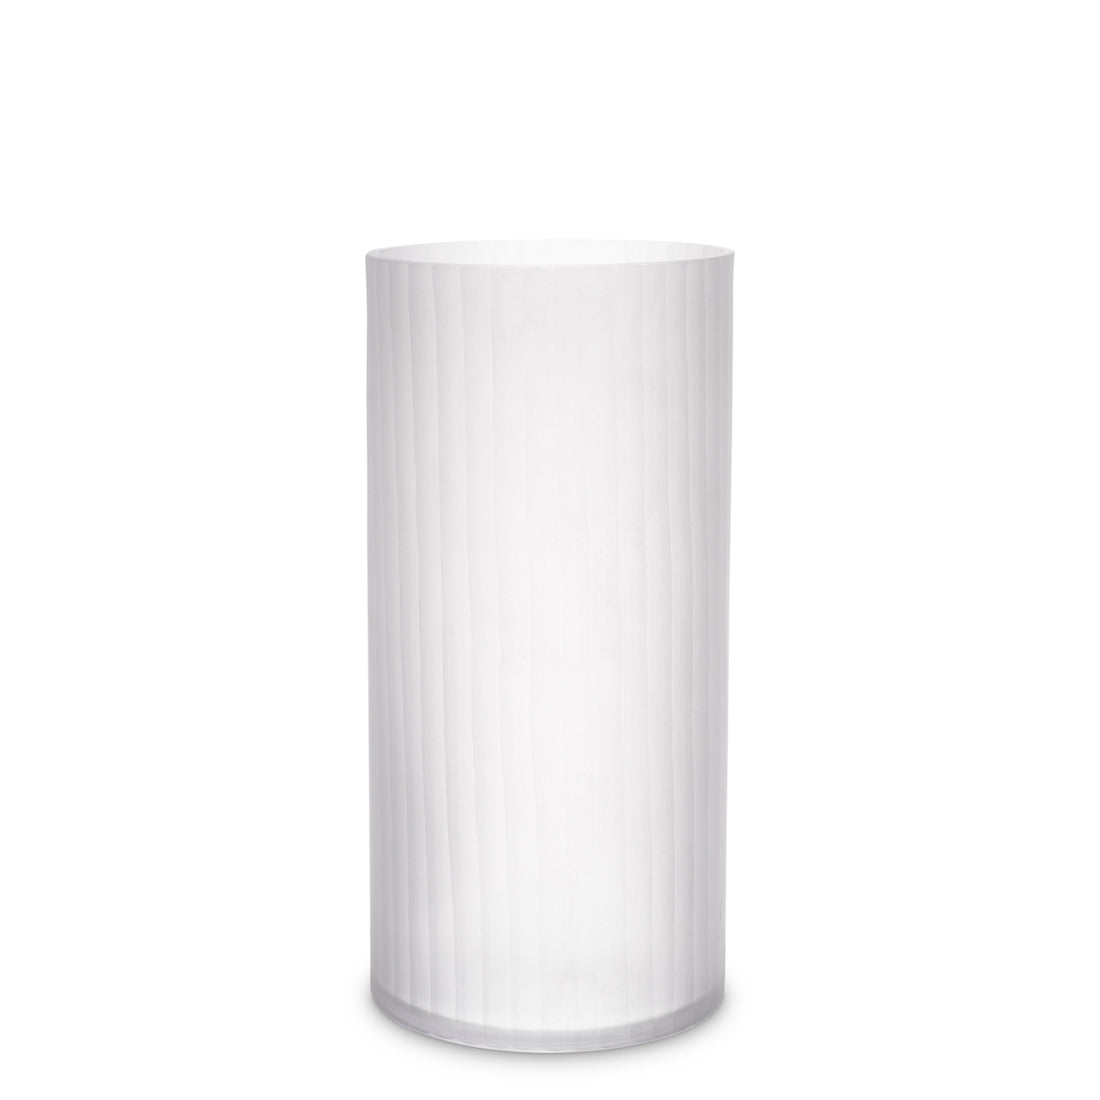 Vase Haight S frosted white